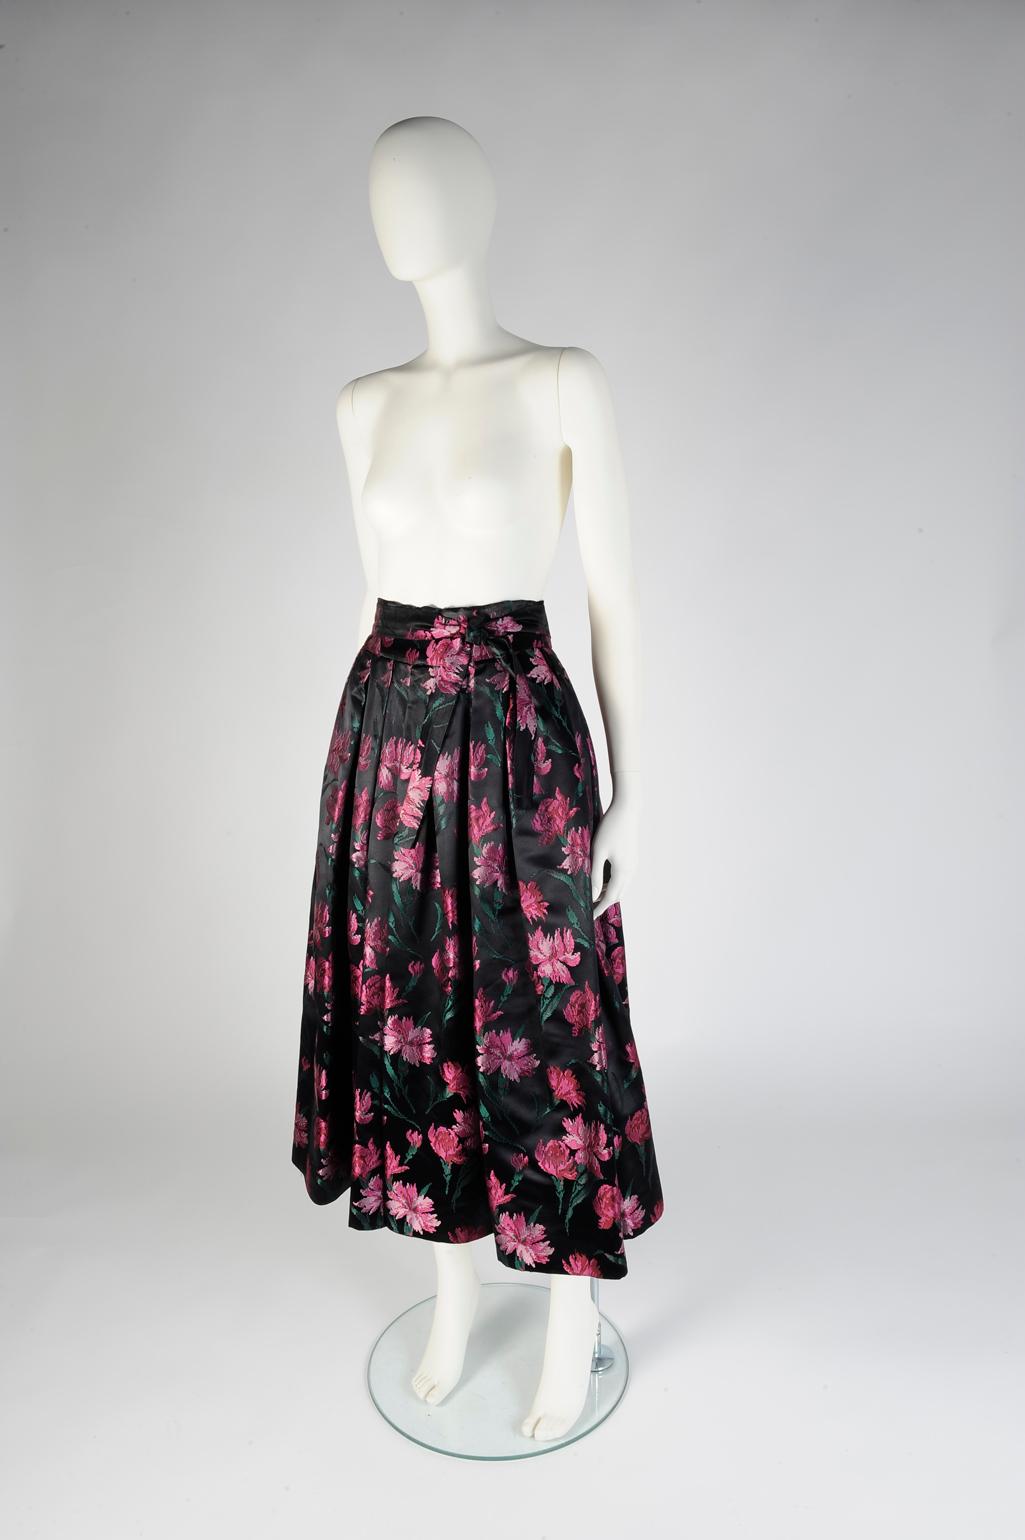 Black Christian Dior Demi Couture Belted Evening Puff Skirt, Circa 1953